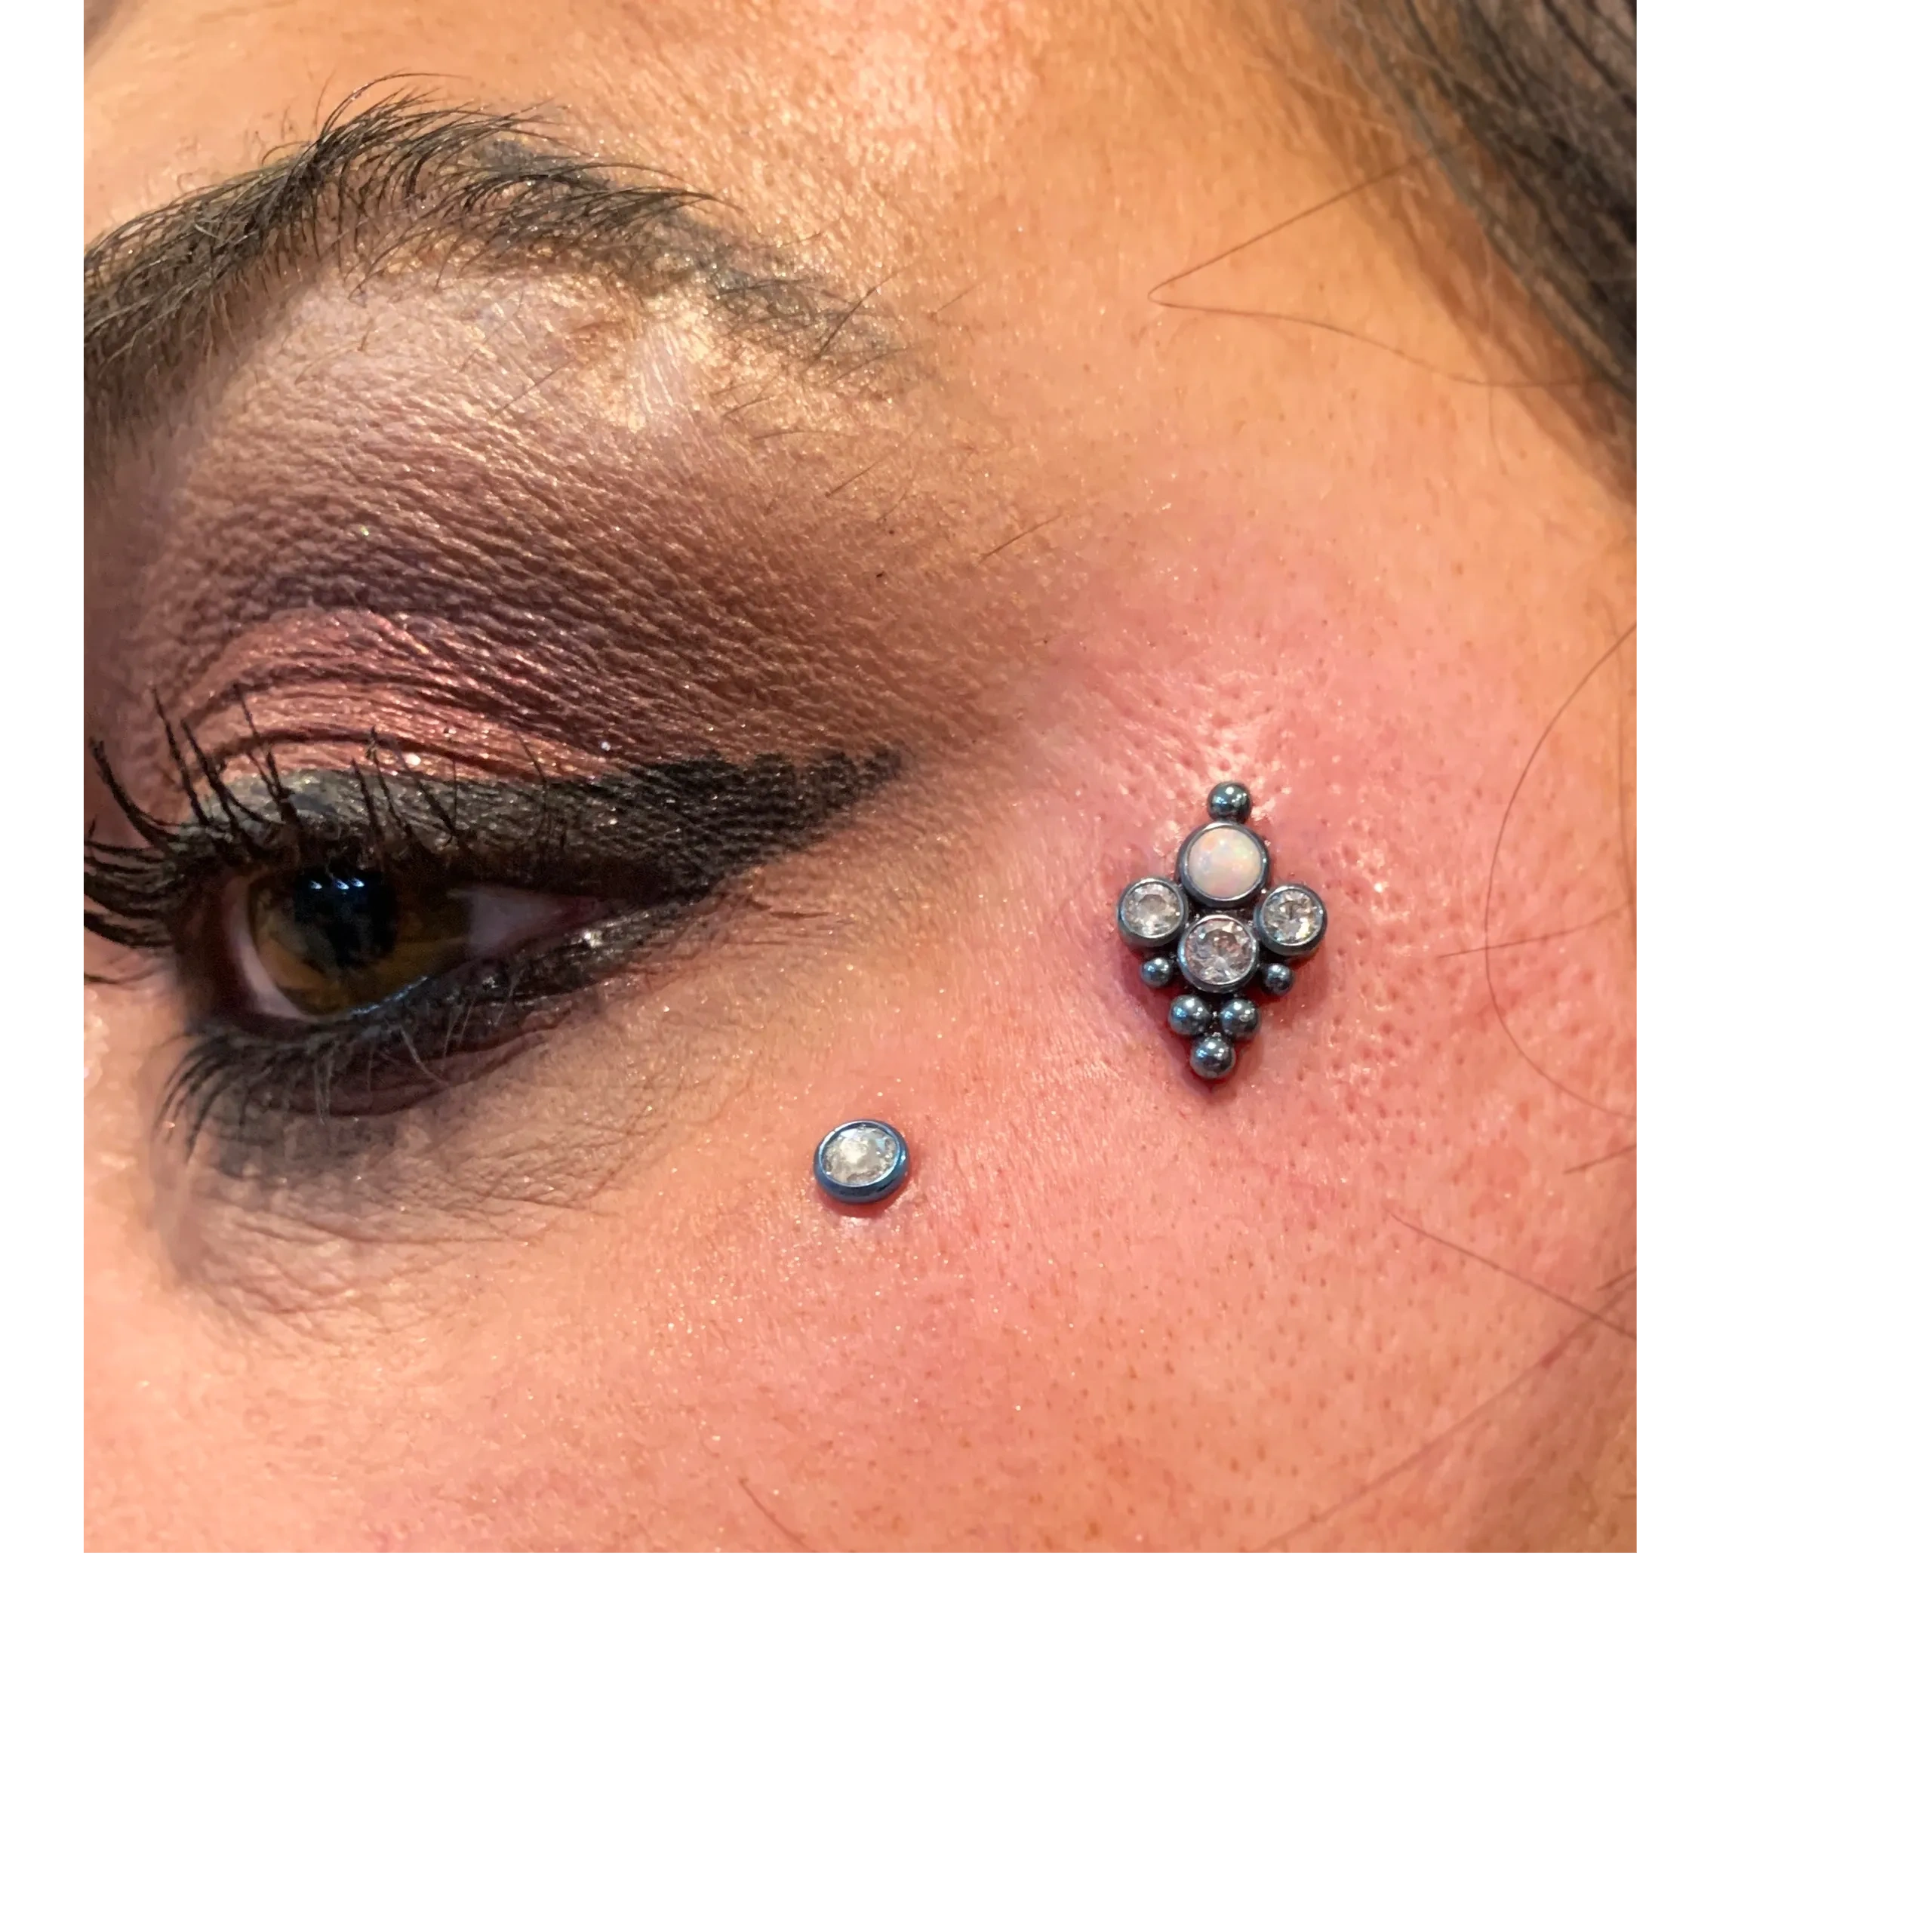 Product Meerdere Civic Comprehensive Guide to Dermal Piercings: All You Need to Know